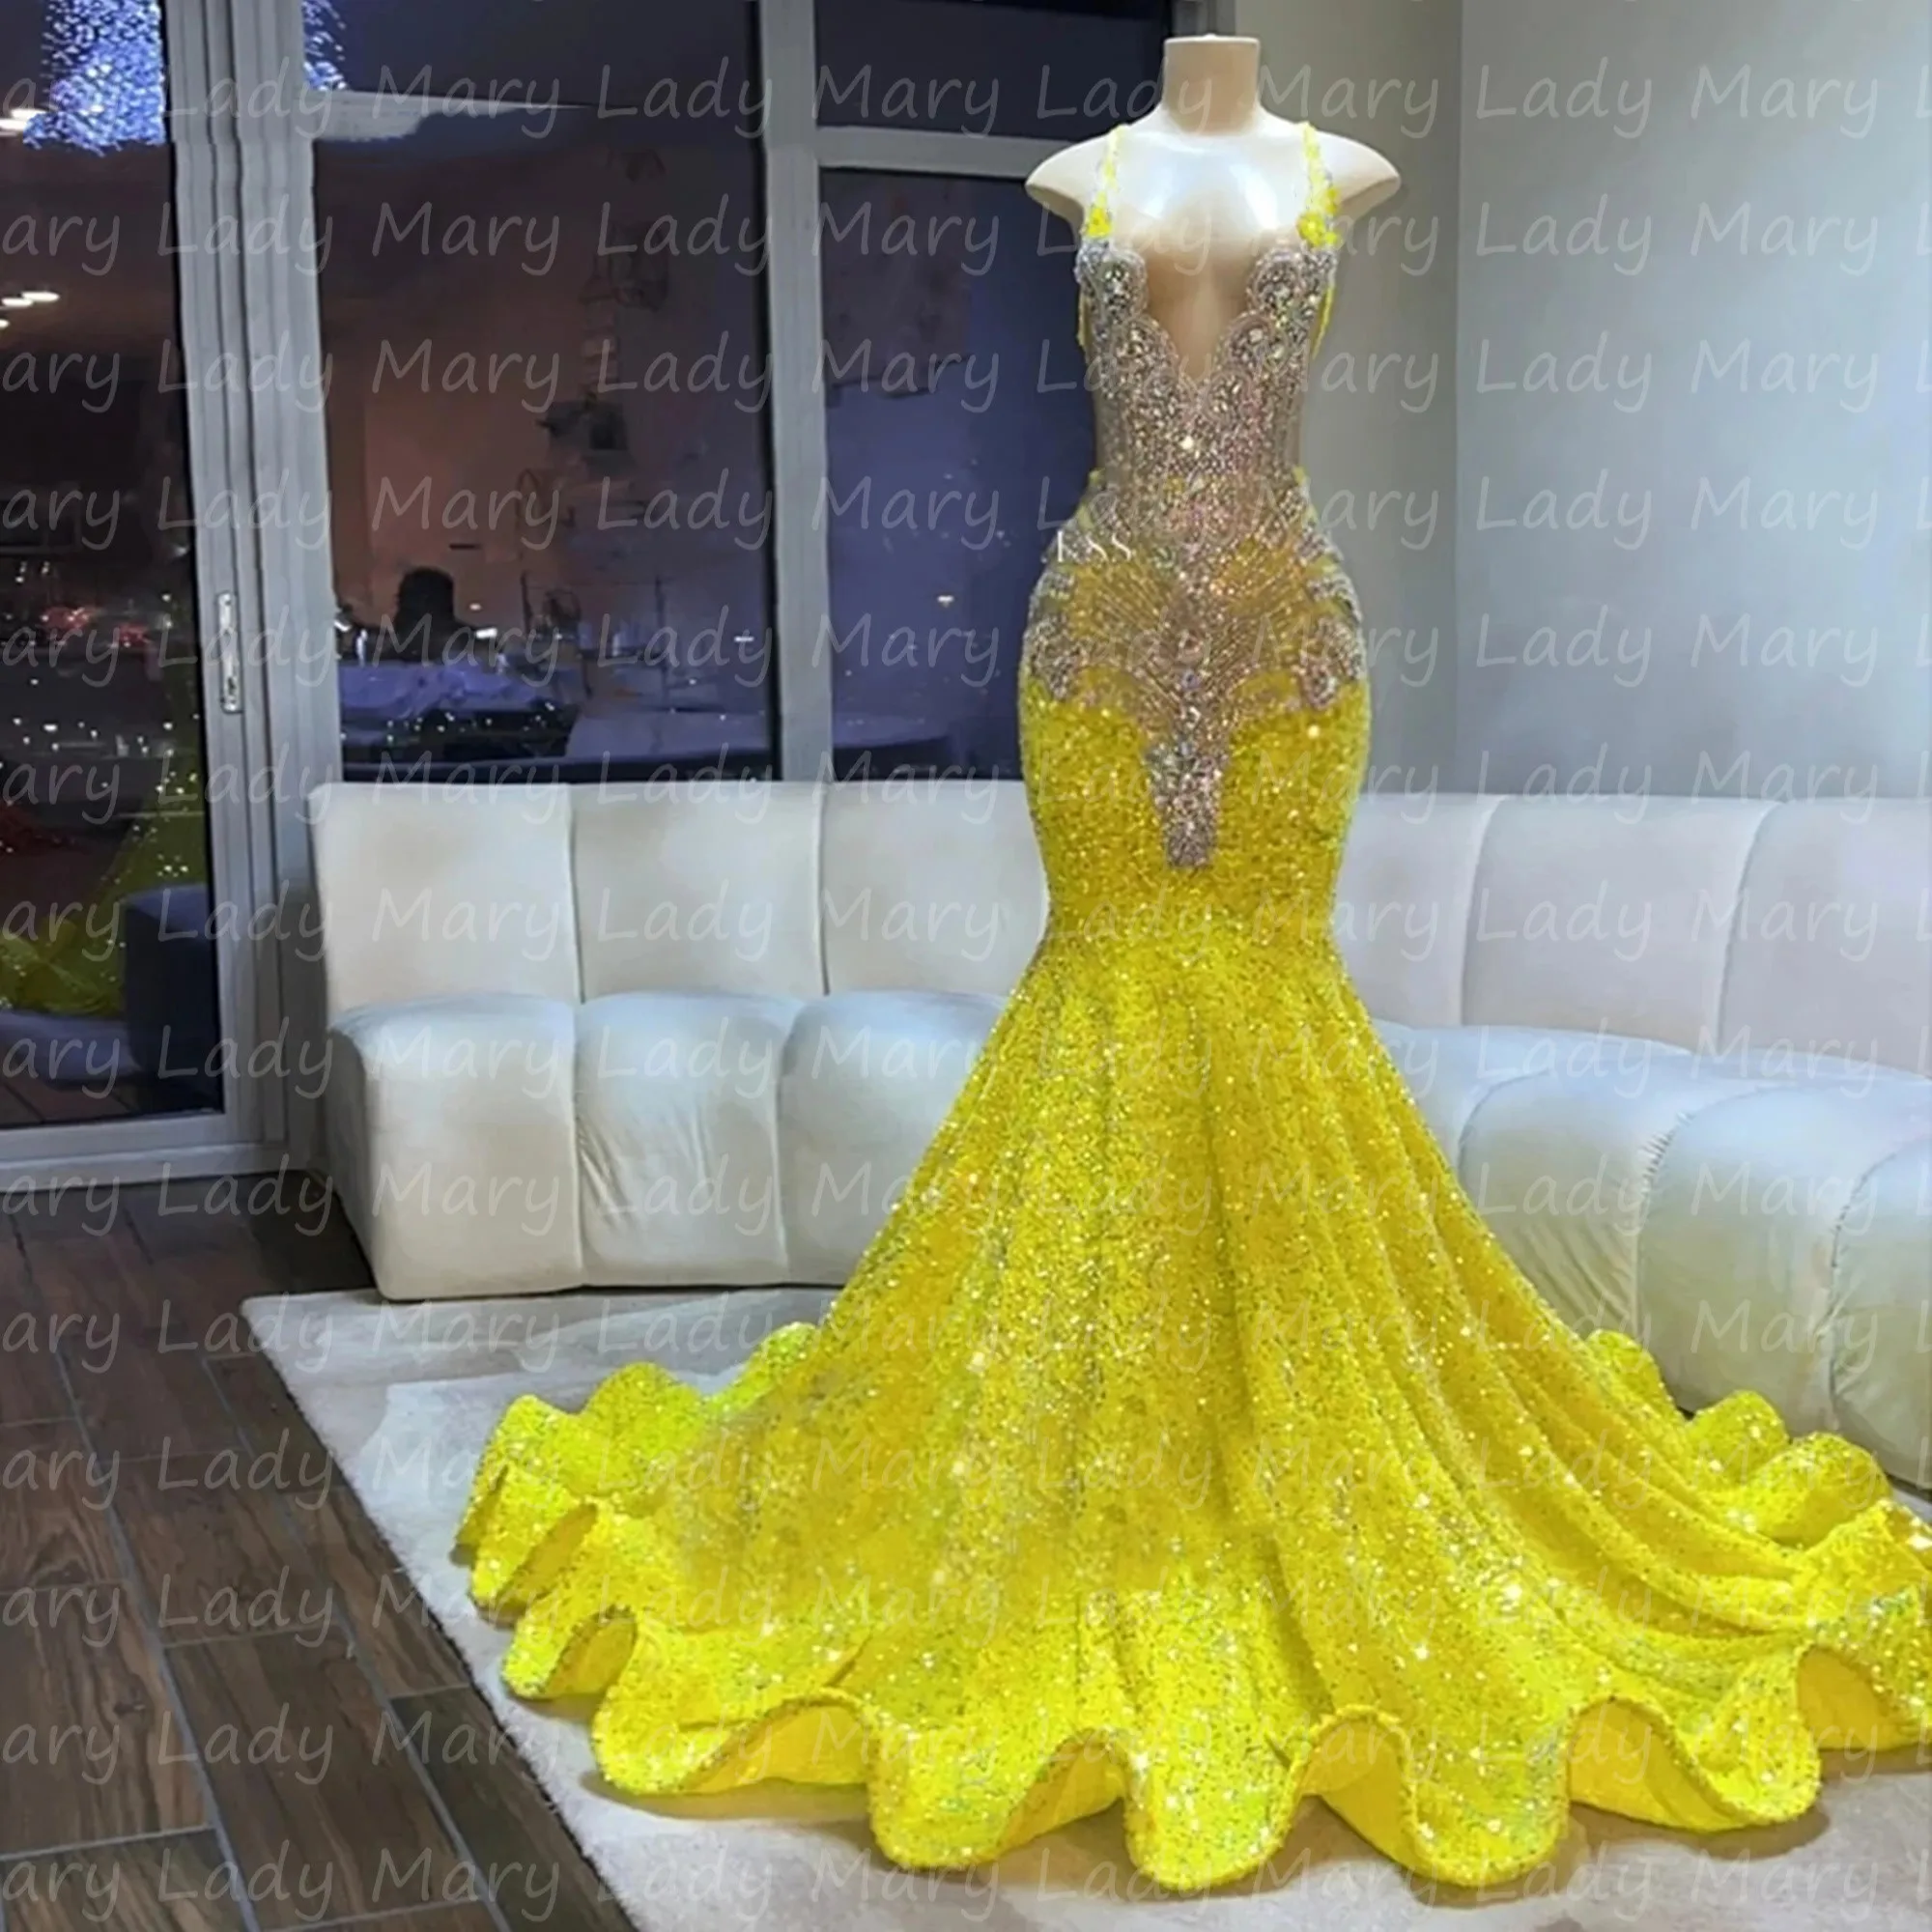 

Shinny Crystal Yellow Prom Dresses 2023 Beads Gorgeous Sequins Girls Formal Evening Gowns Mermaid Designer Graduation Party Robe